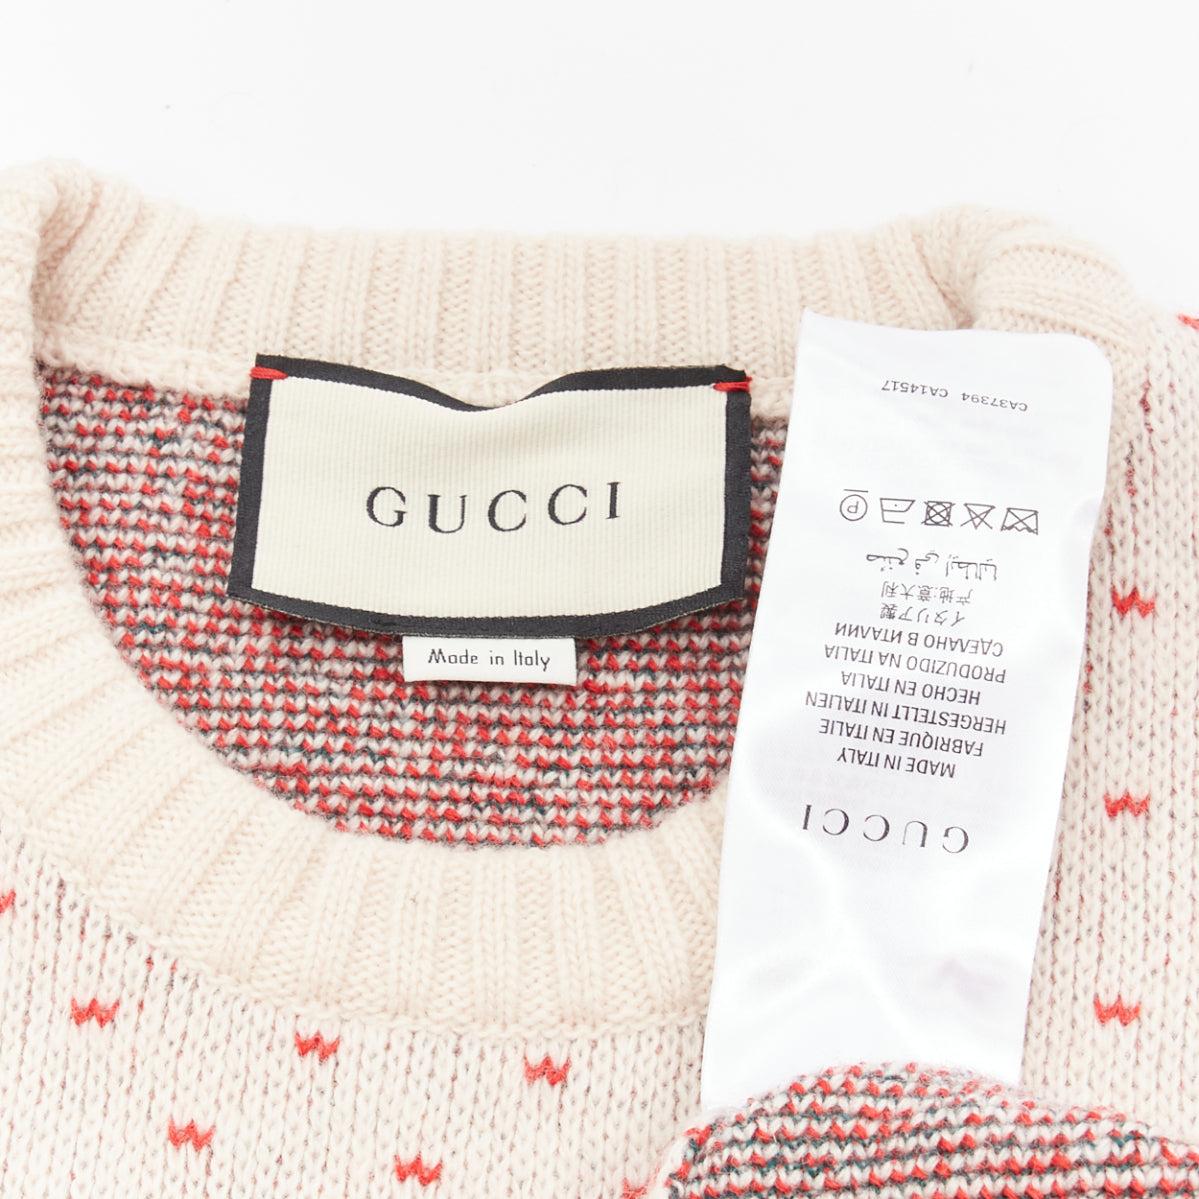 GUCCI 100% wool cream red fairisle vintage Crest logo intarsia sweater top XS For Sale 4